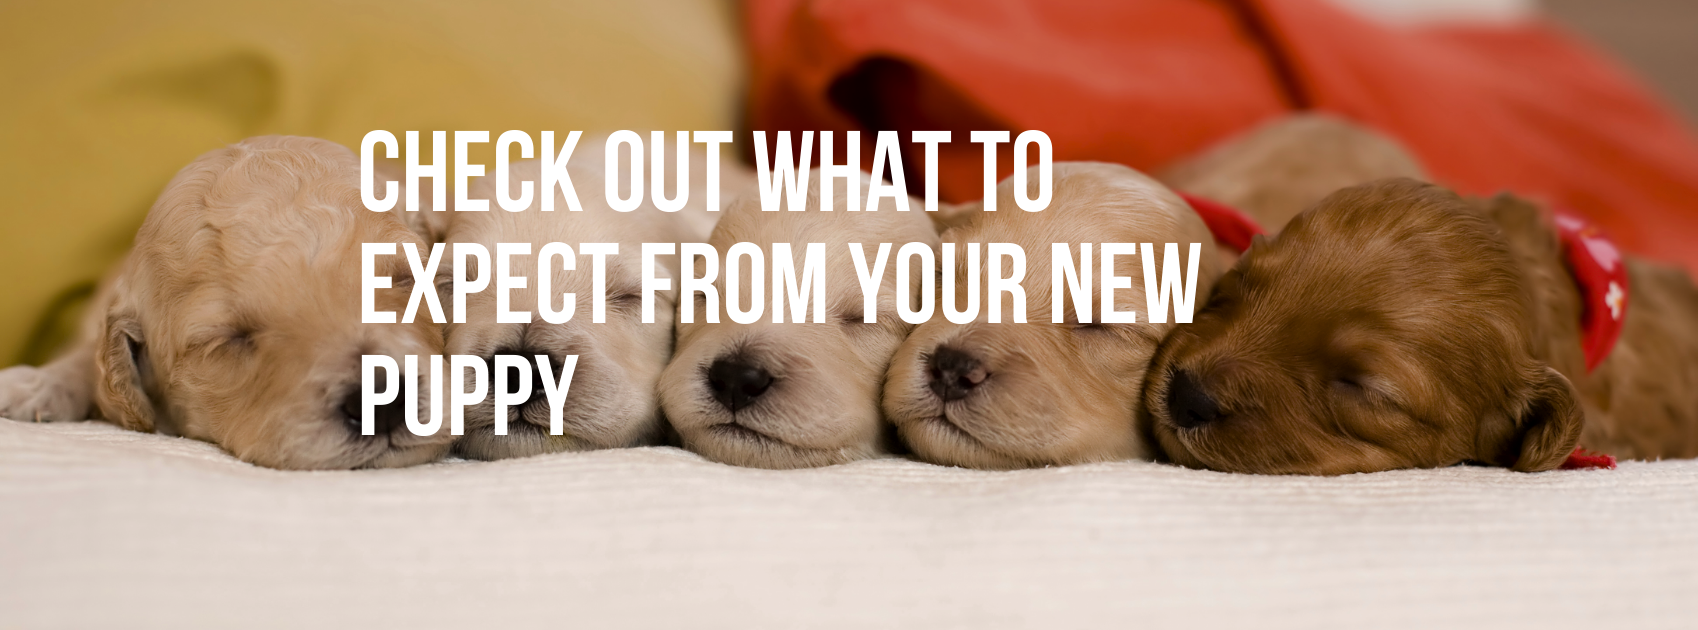 CHECK OUT WHAT TO EXPECT FROM YOUR NEW PUPPY